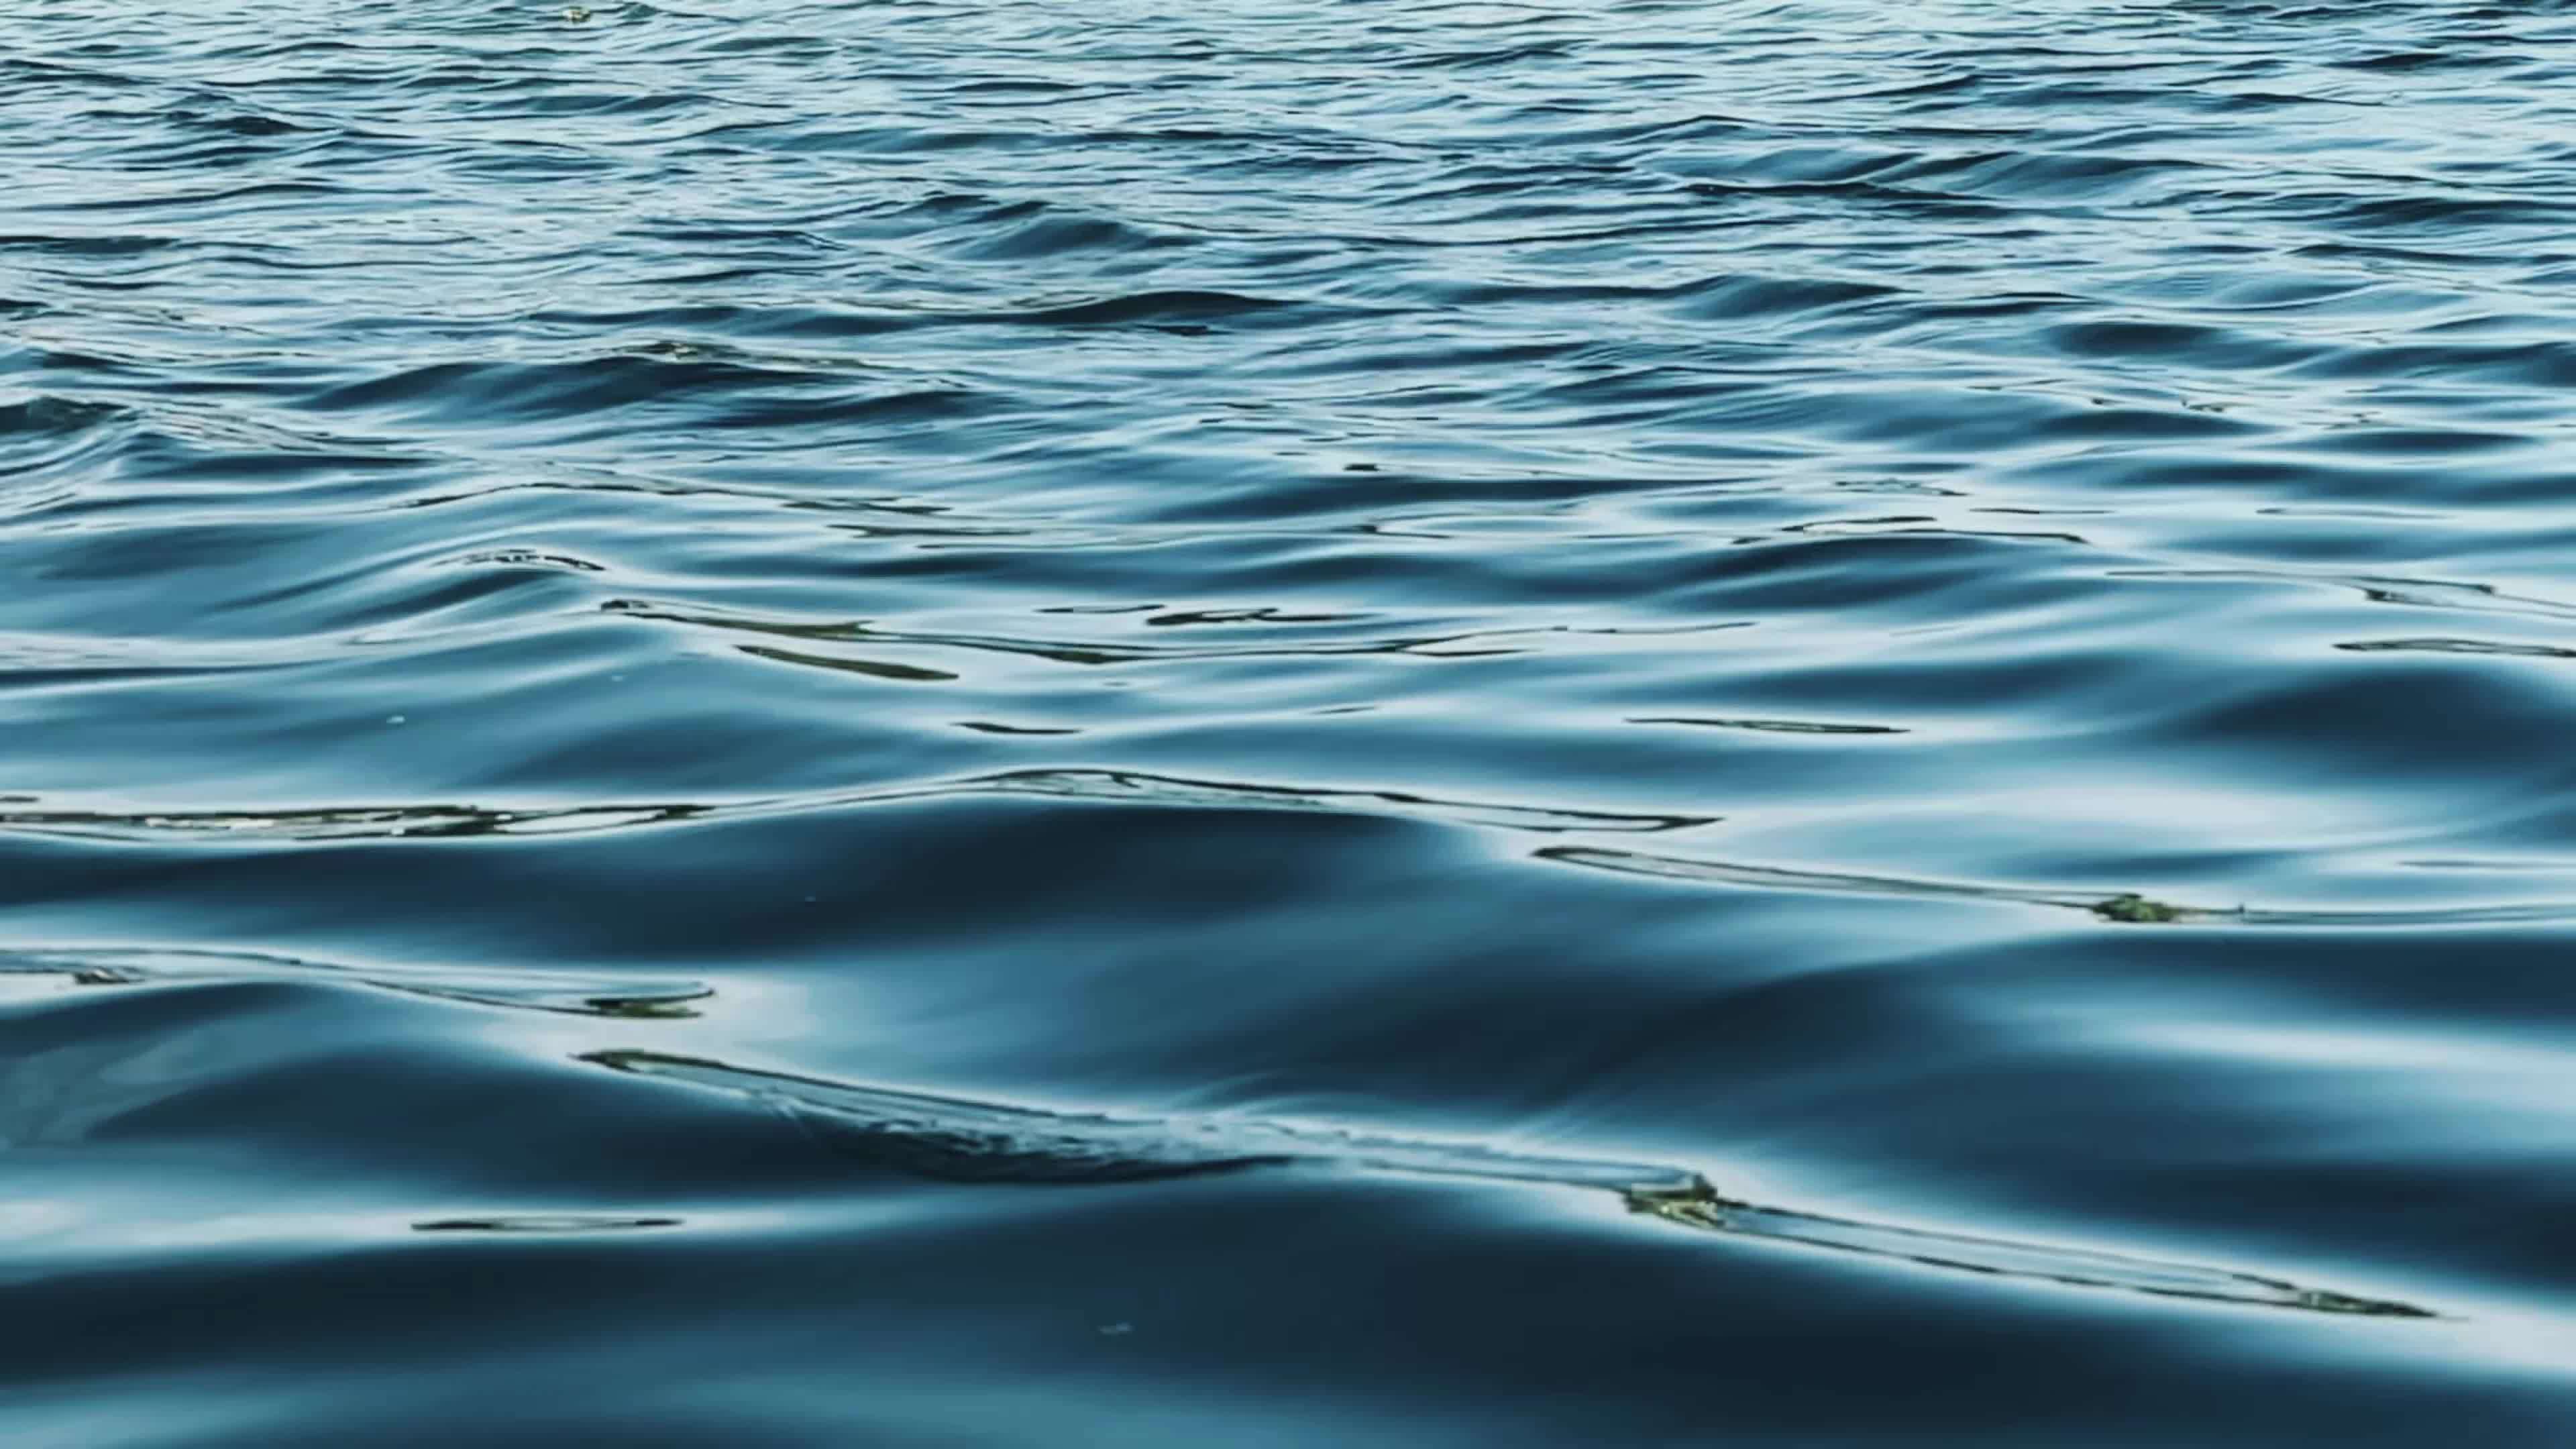 https://static.vecteezy.com/system/resources/thumbnails/020/287/066/original/blue-sea-water-wave-water-background-ocean-waves-free-video.jpg